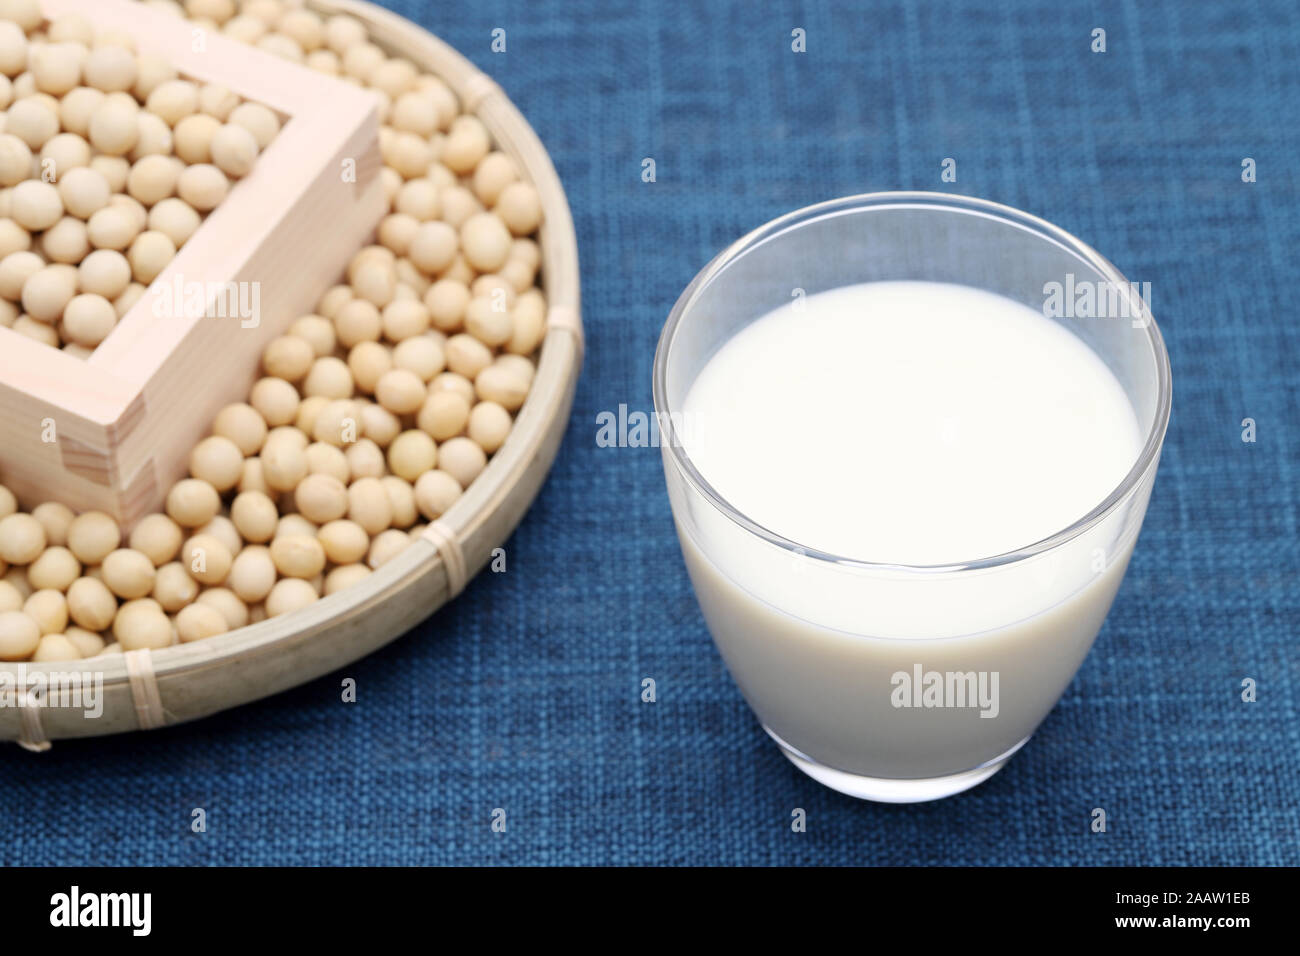 Glass of tonyu milk with soy bean on dining table Stock Photo